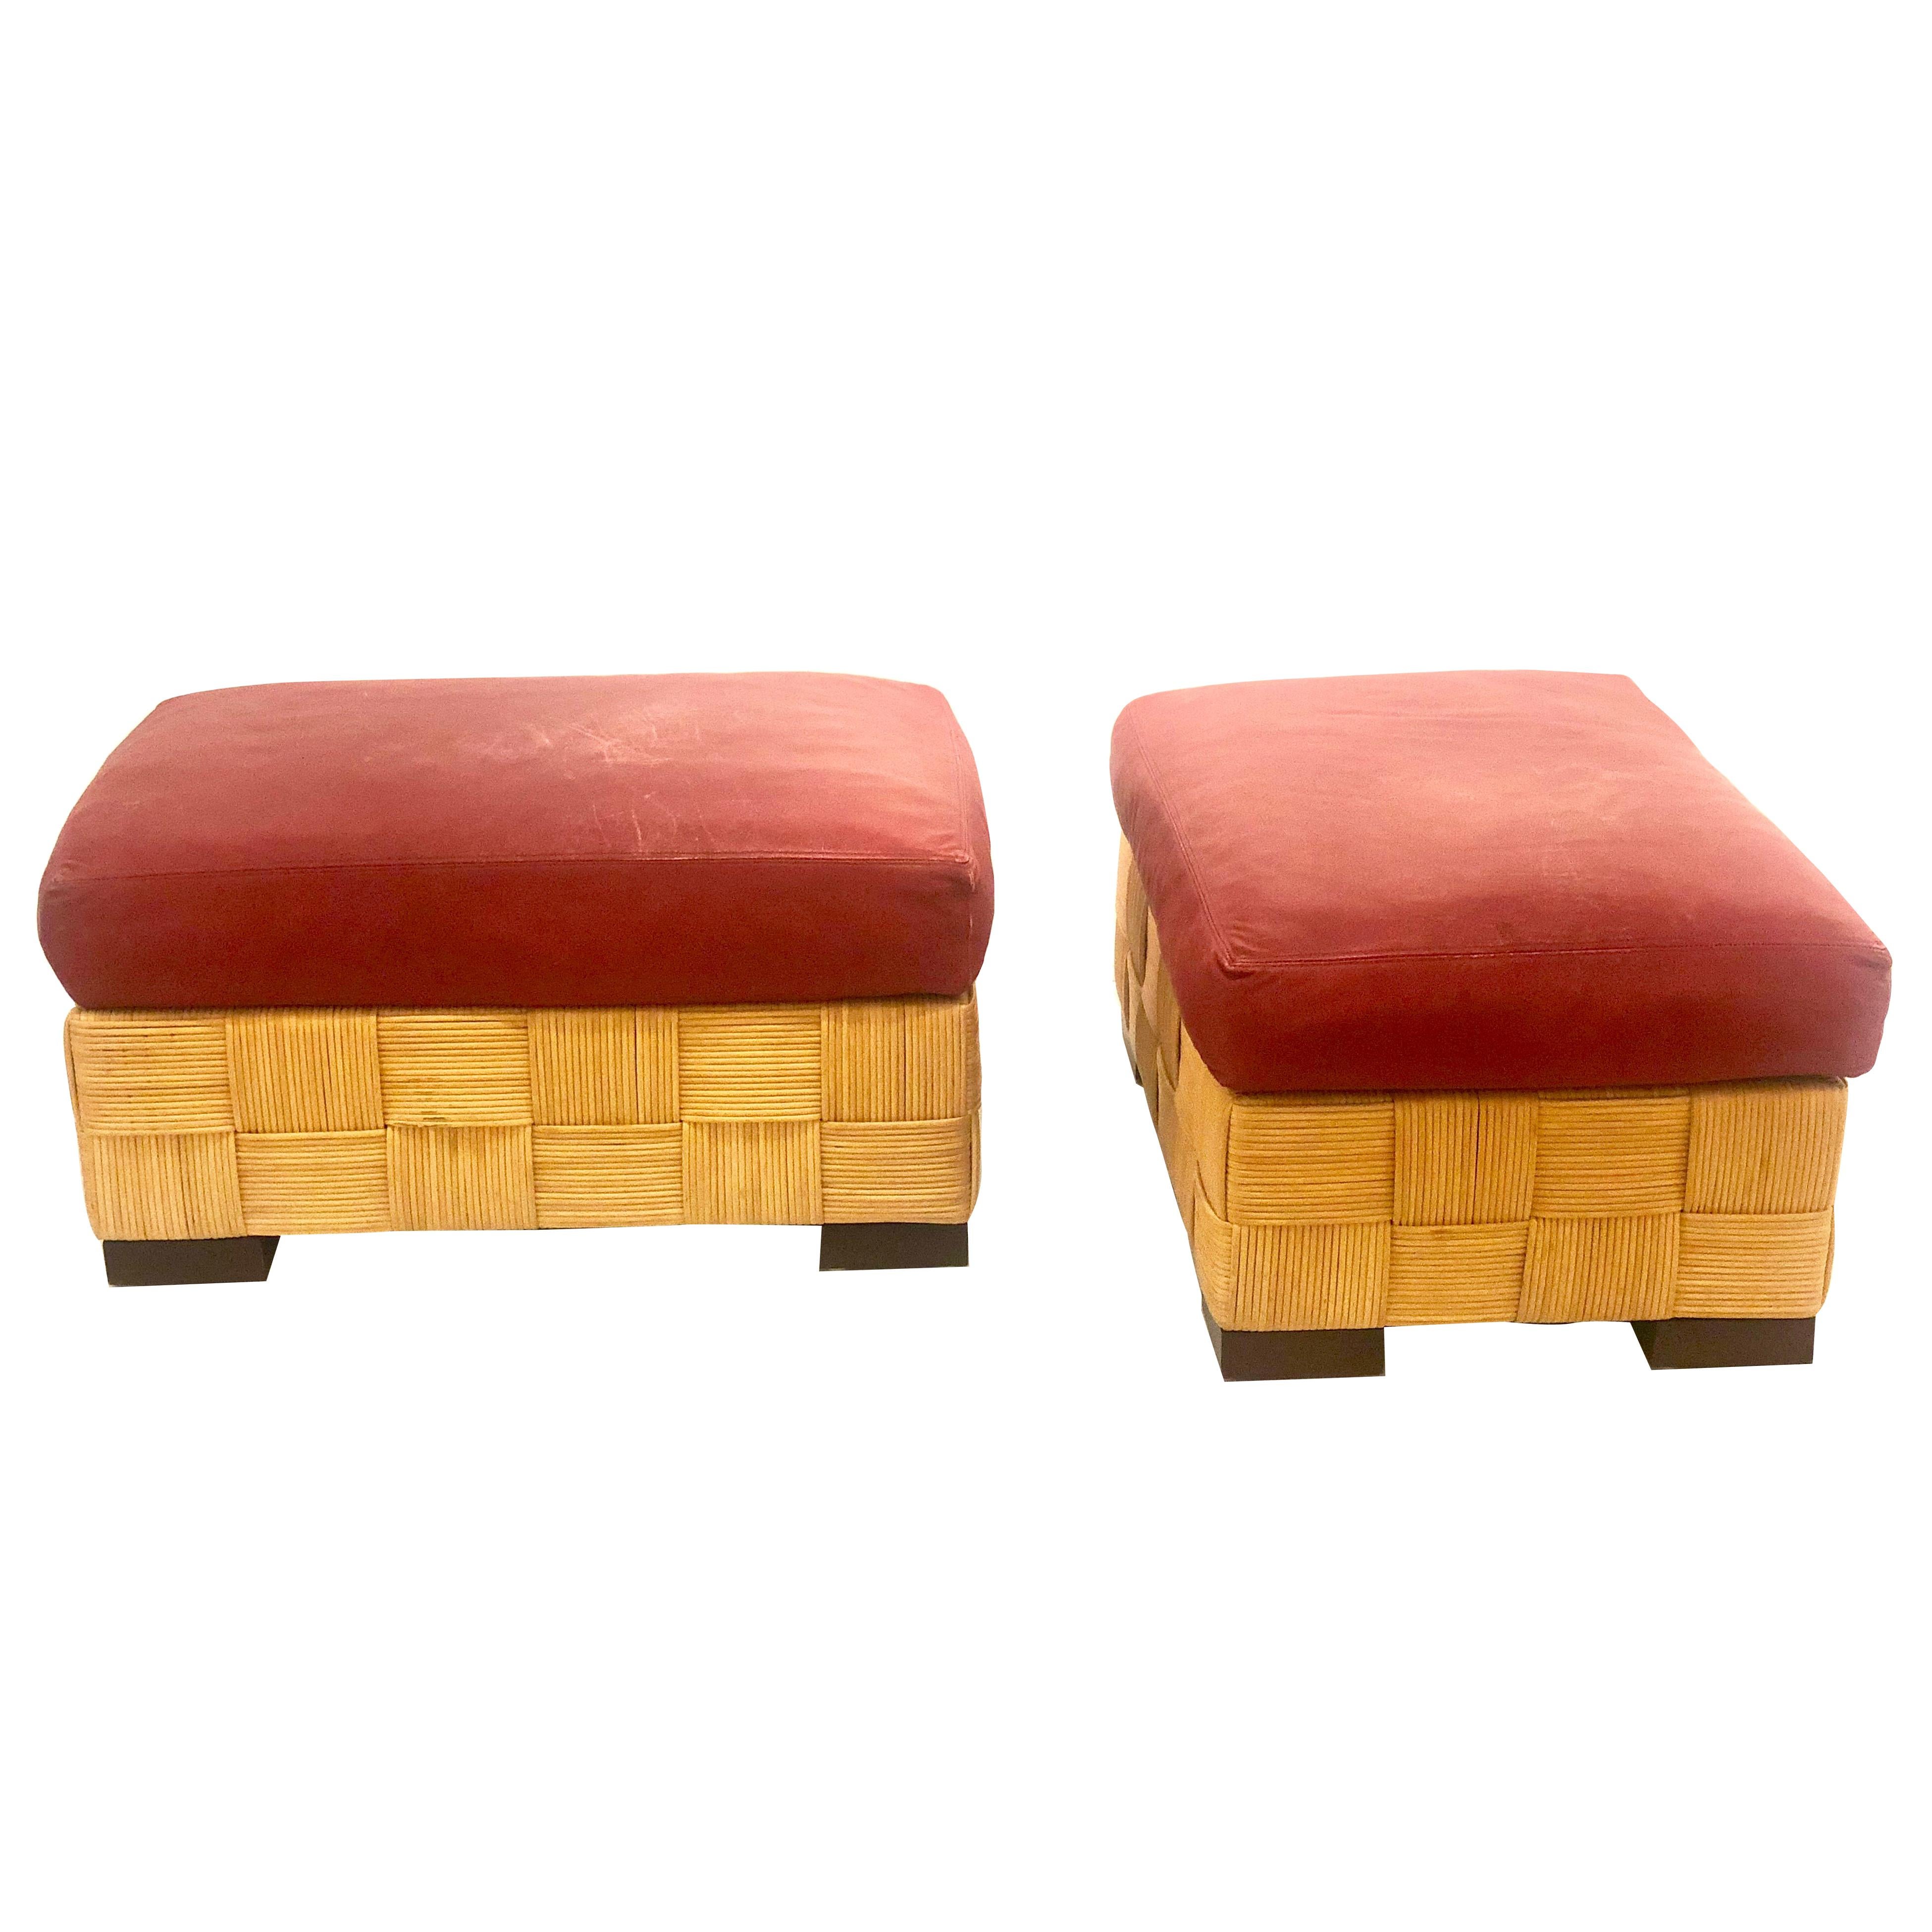 John Hutton for Donghia Pair of Wicker Ottomans in Red Leather